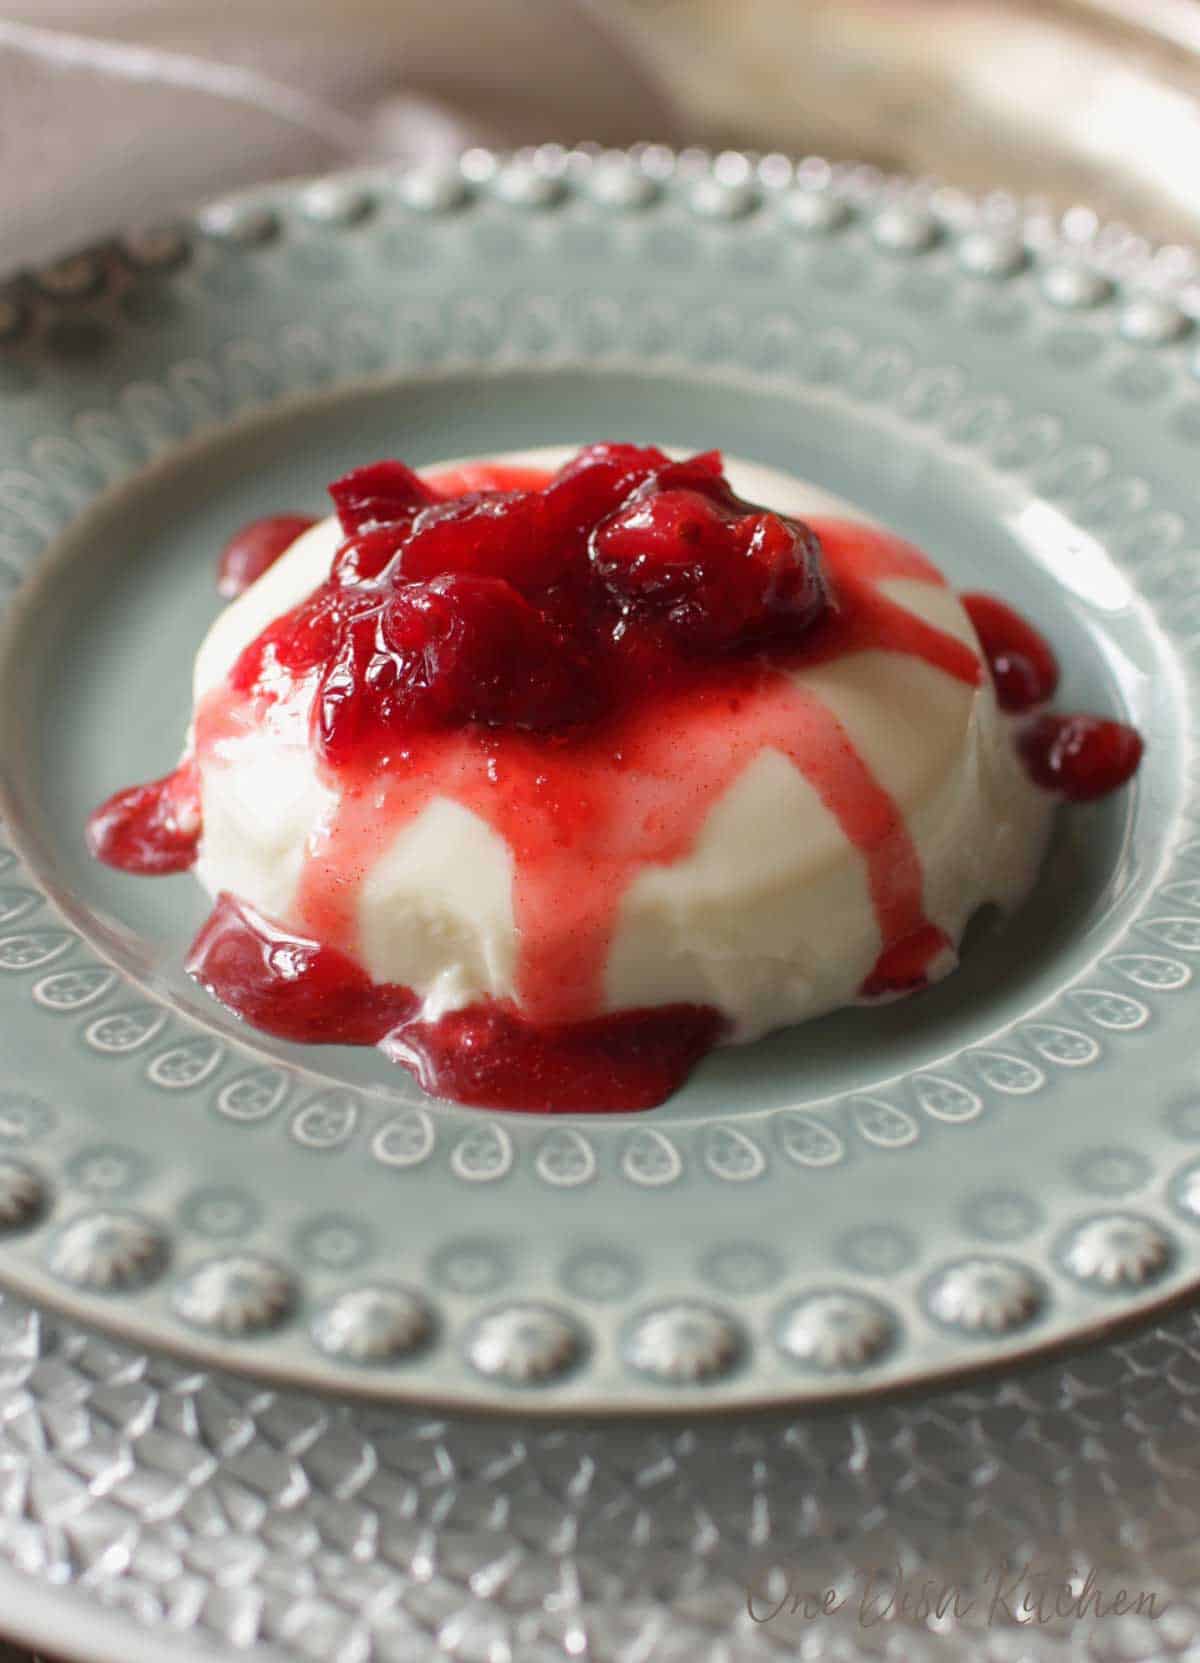 Panna cotta topped with cranberry jam on a plate